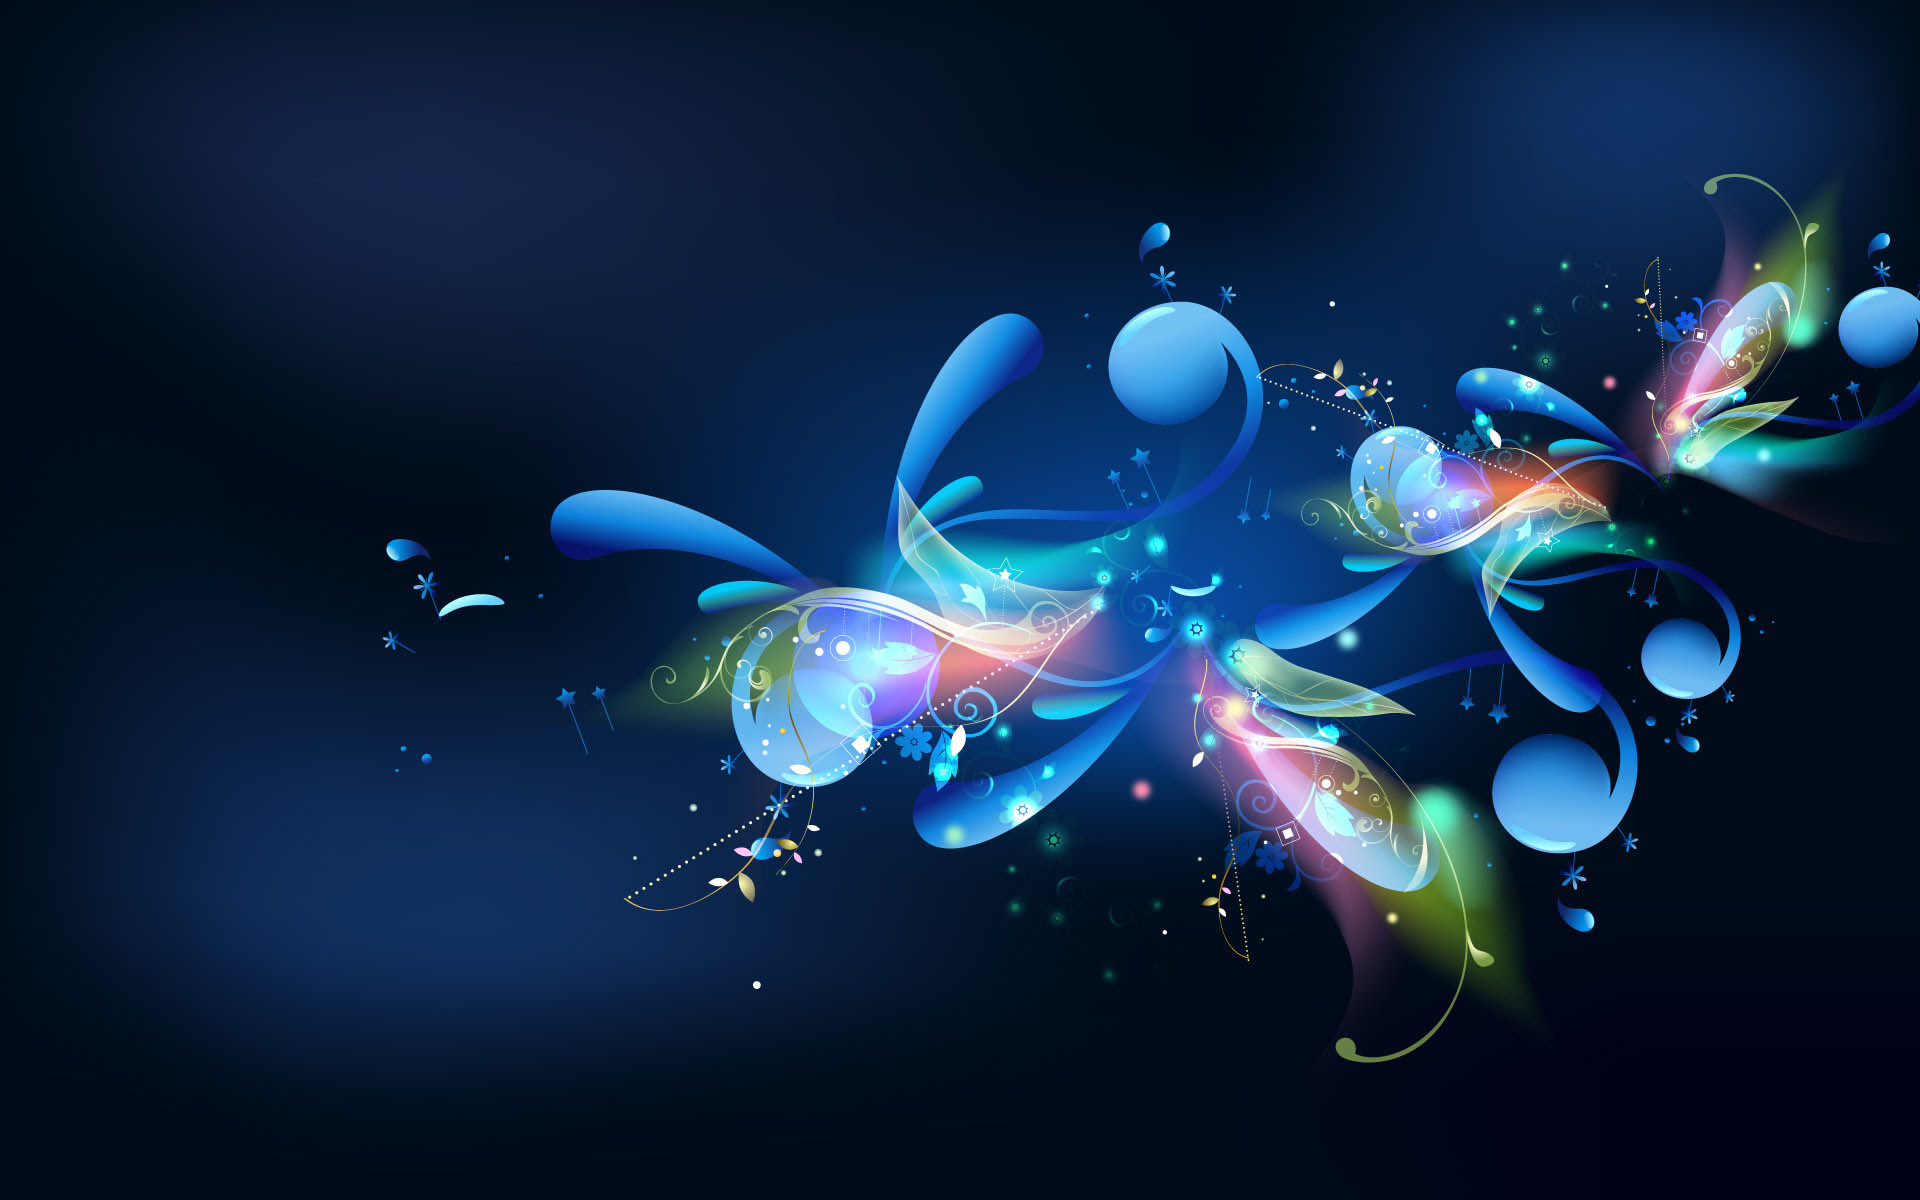 Blue Abstract Wallpaper for PC 56+ images